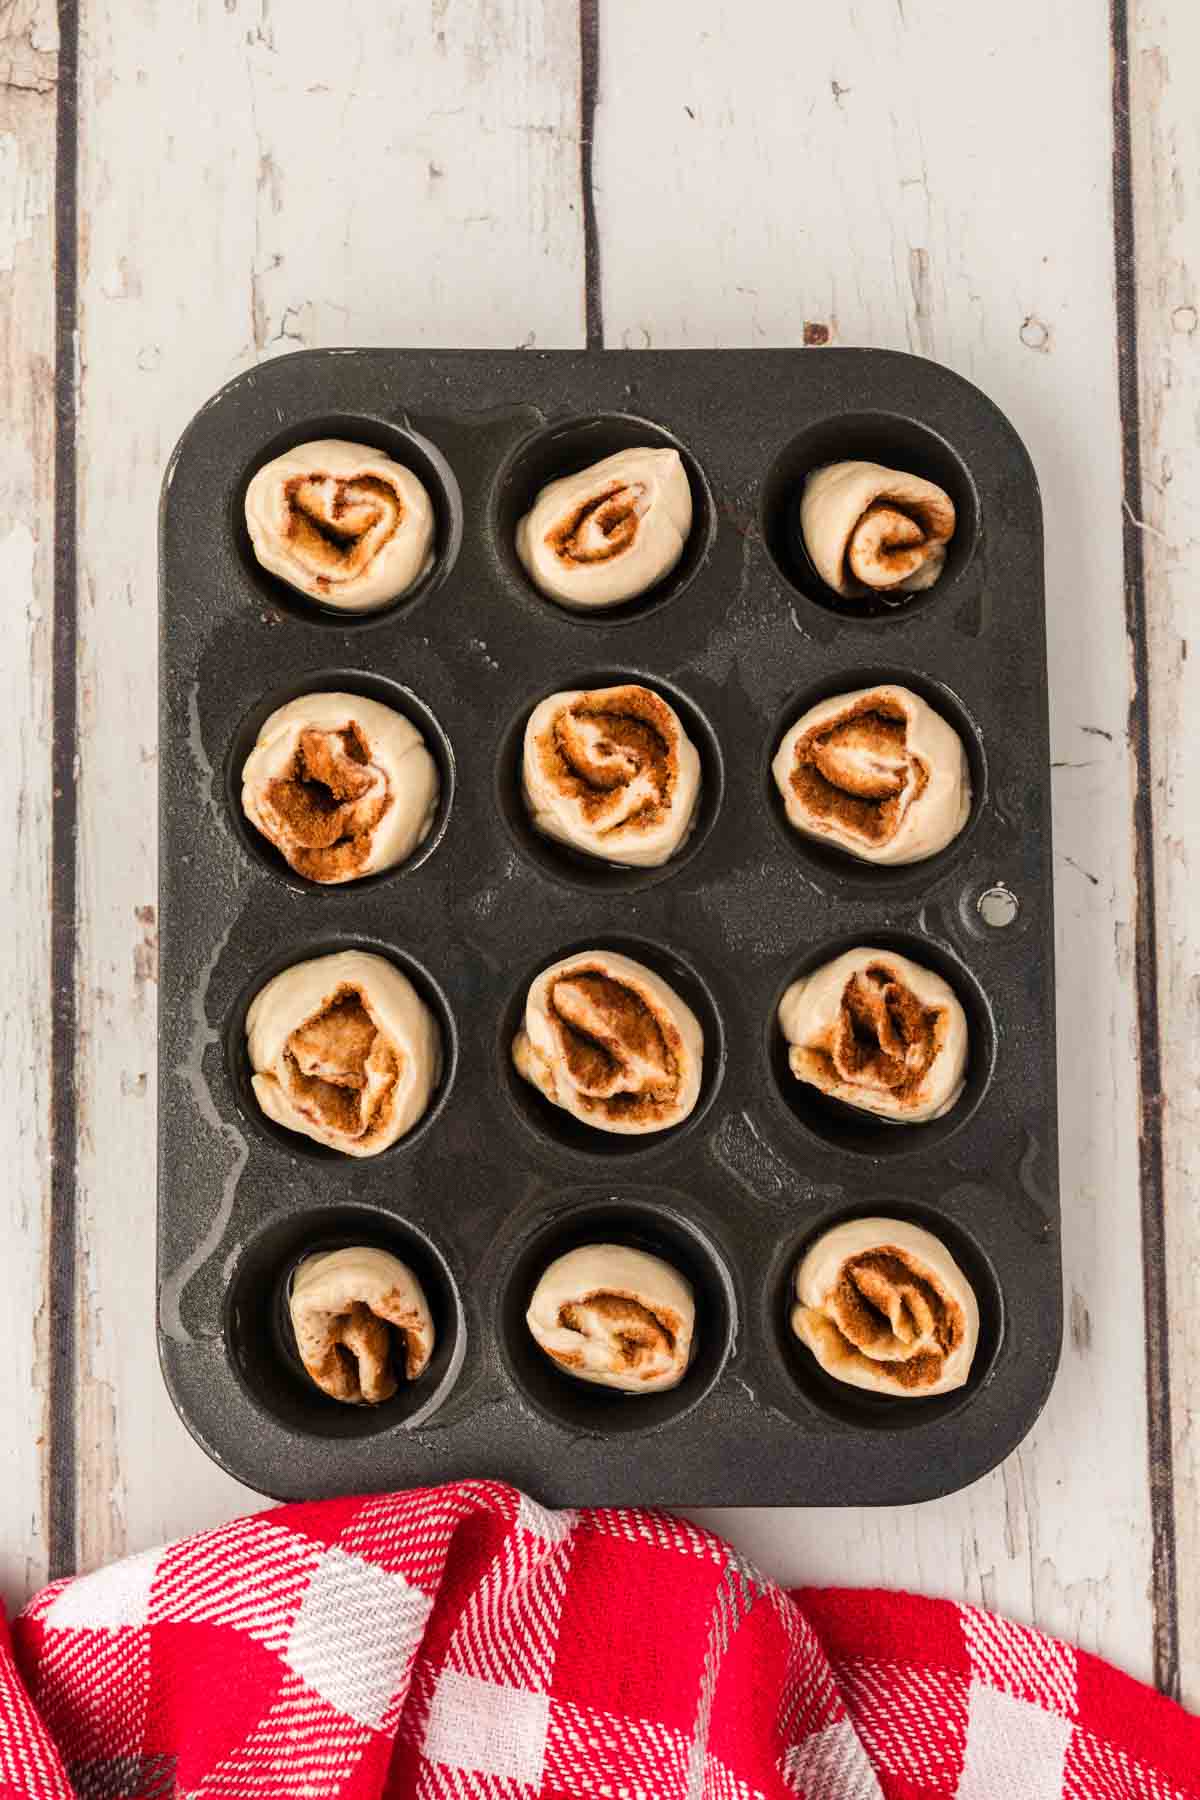 Placing the cinnamon rolls in the muffin tin